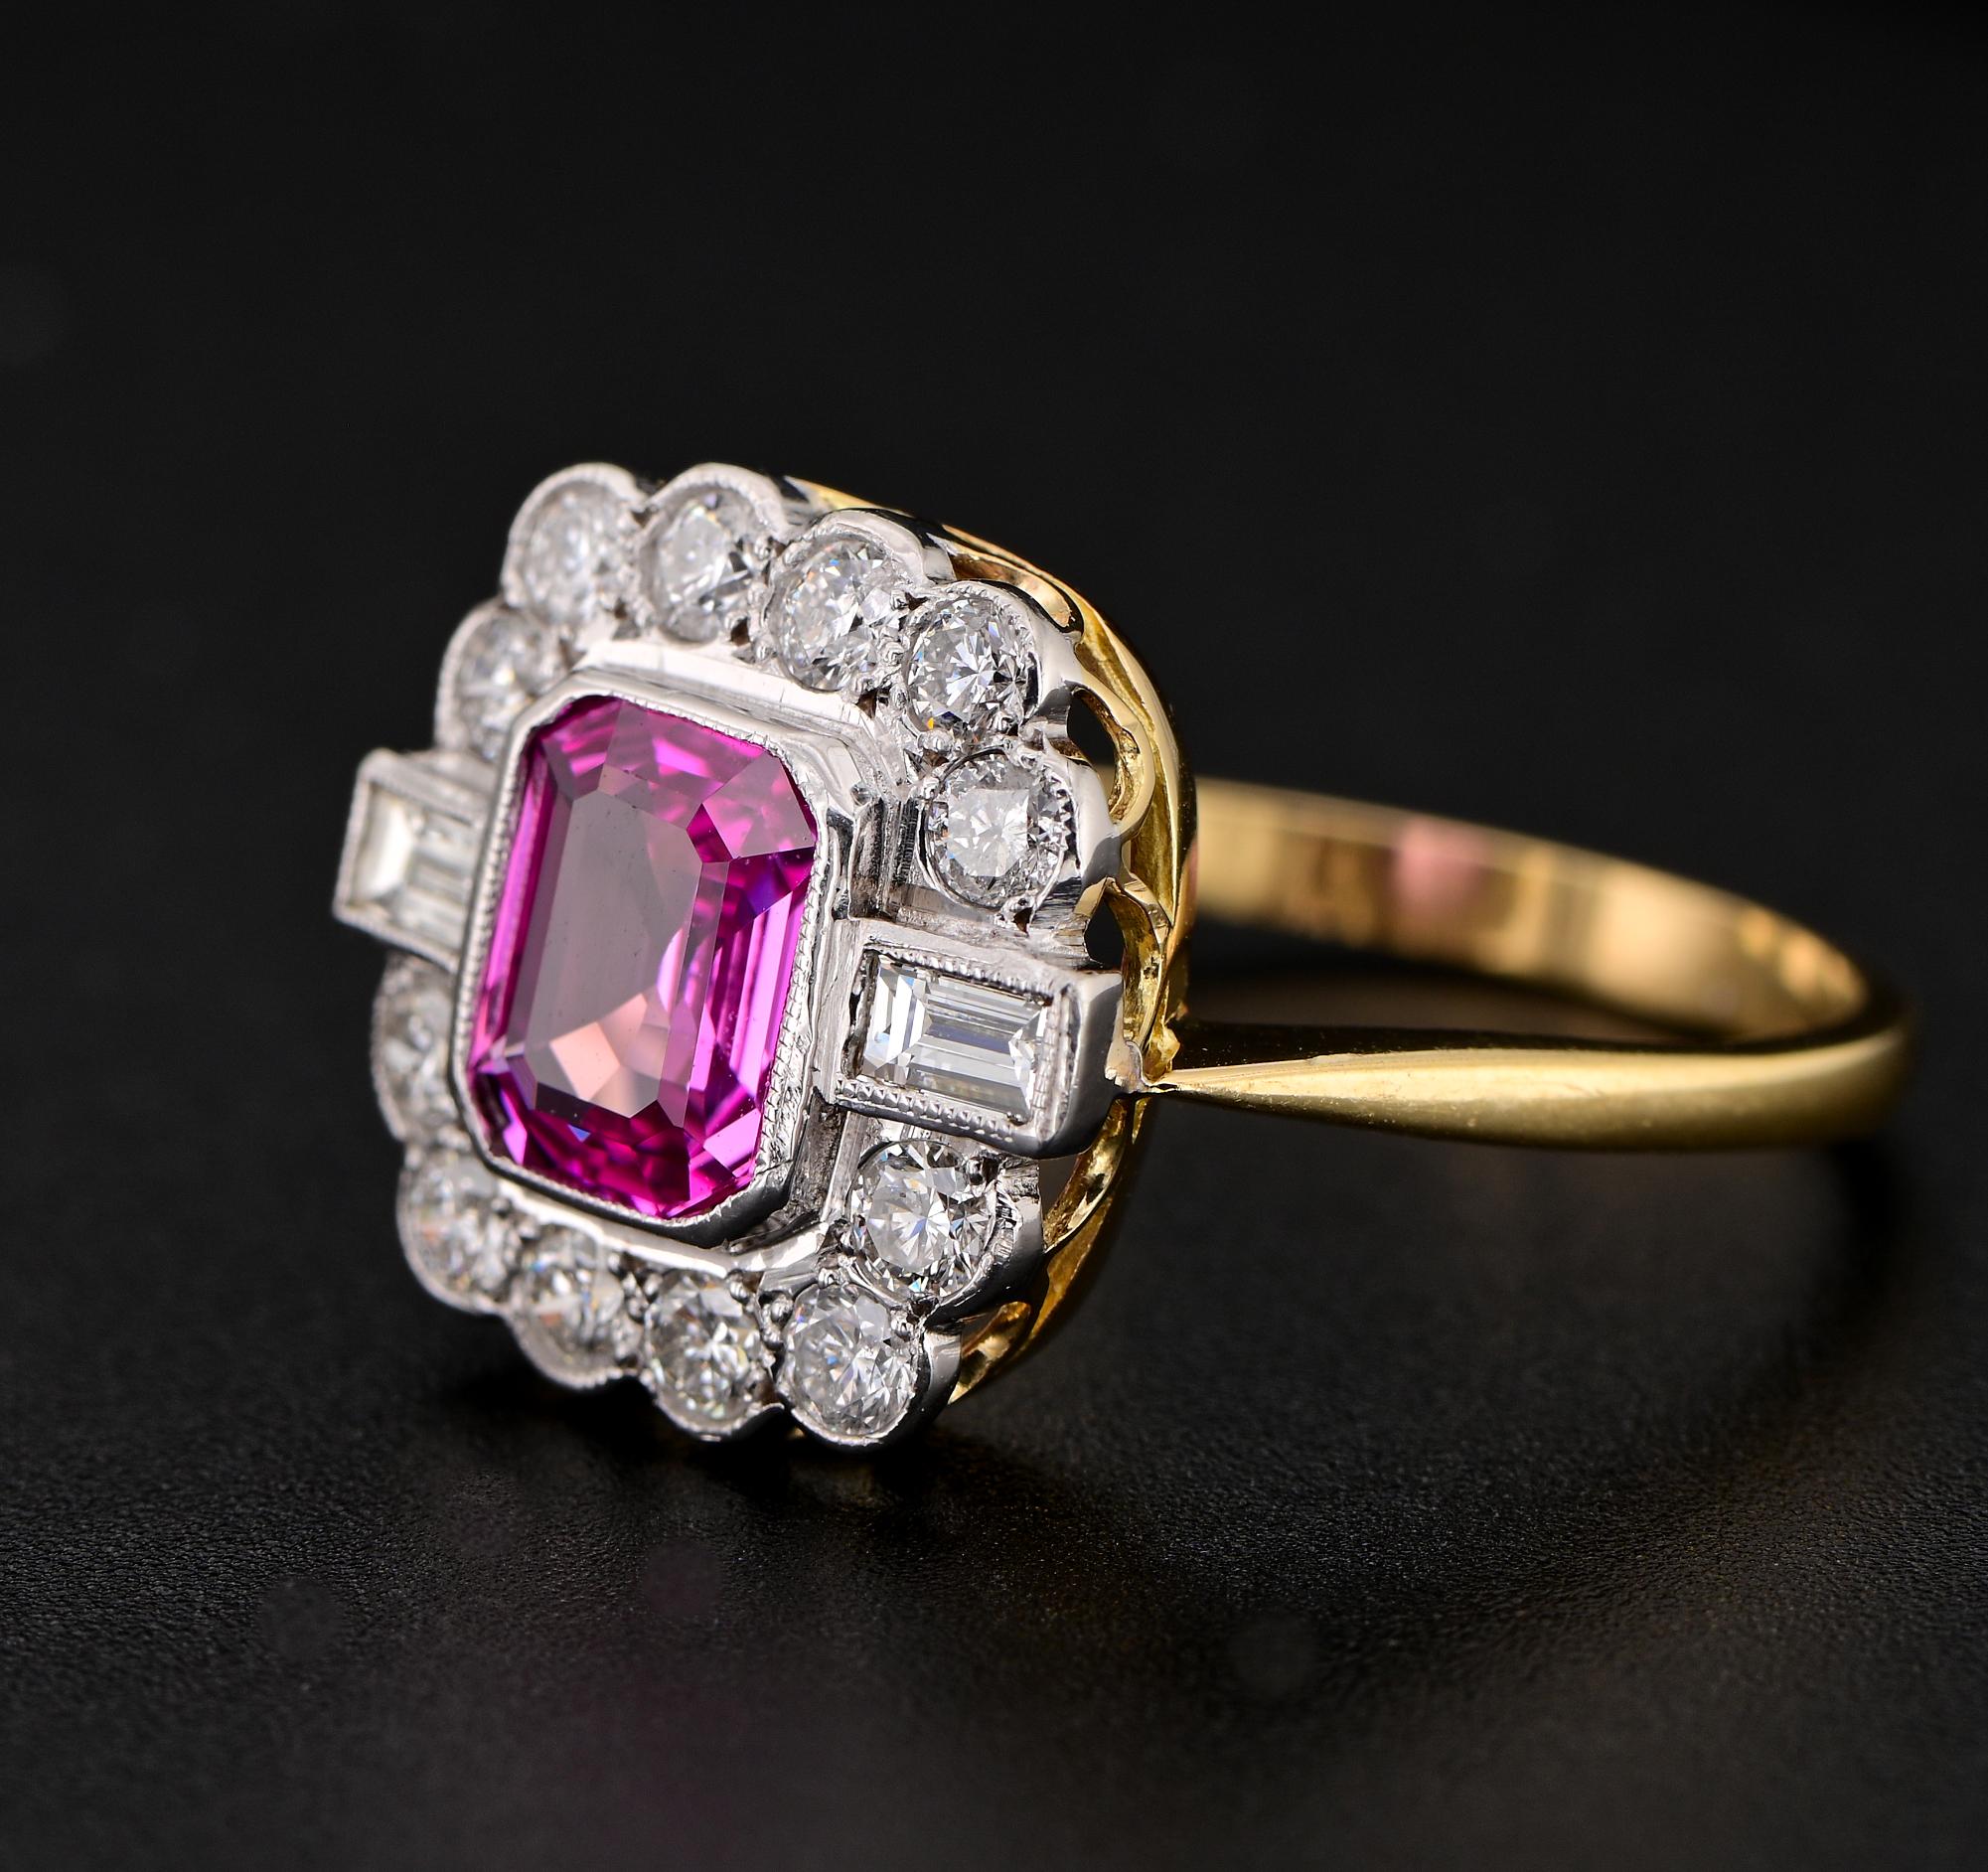 Women's Art Deco 1.40 Ct. Certified Pink Sapphire 1.04 CT Diamond Ring For Sale